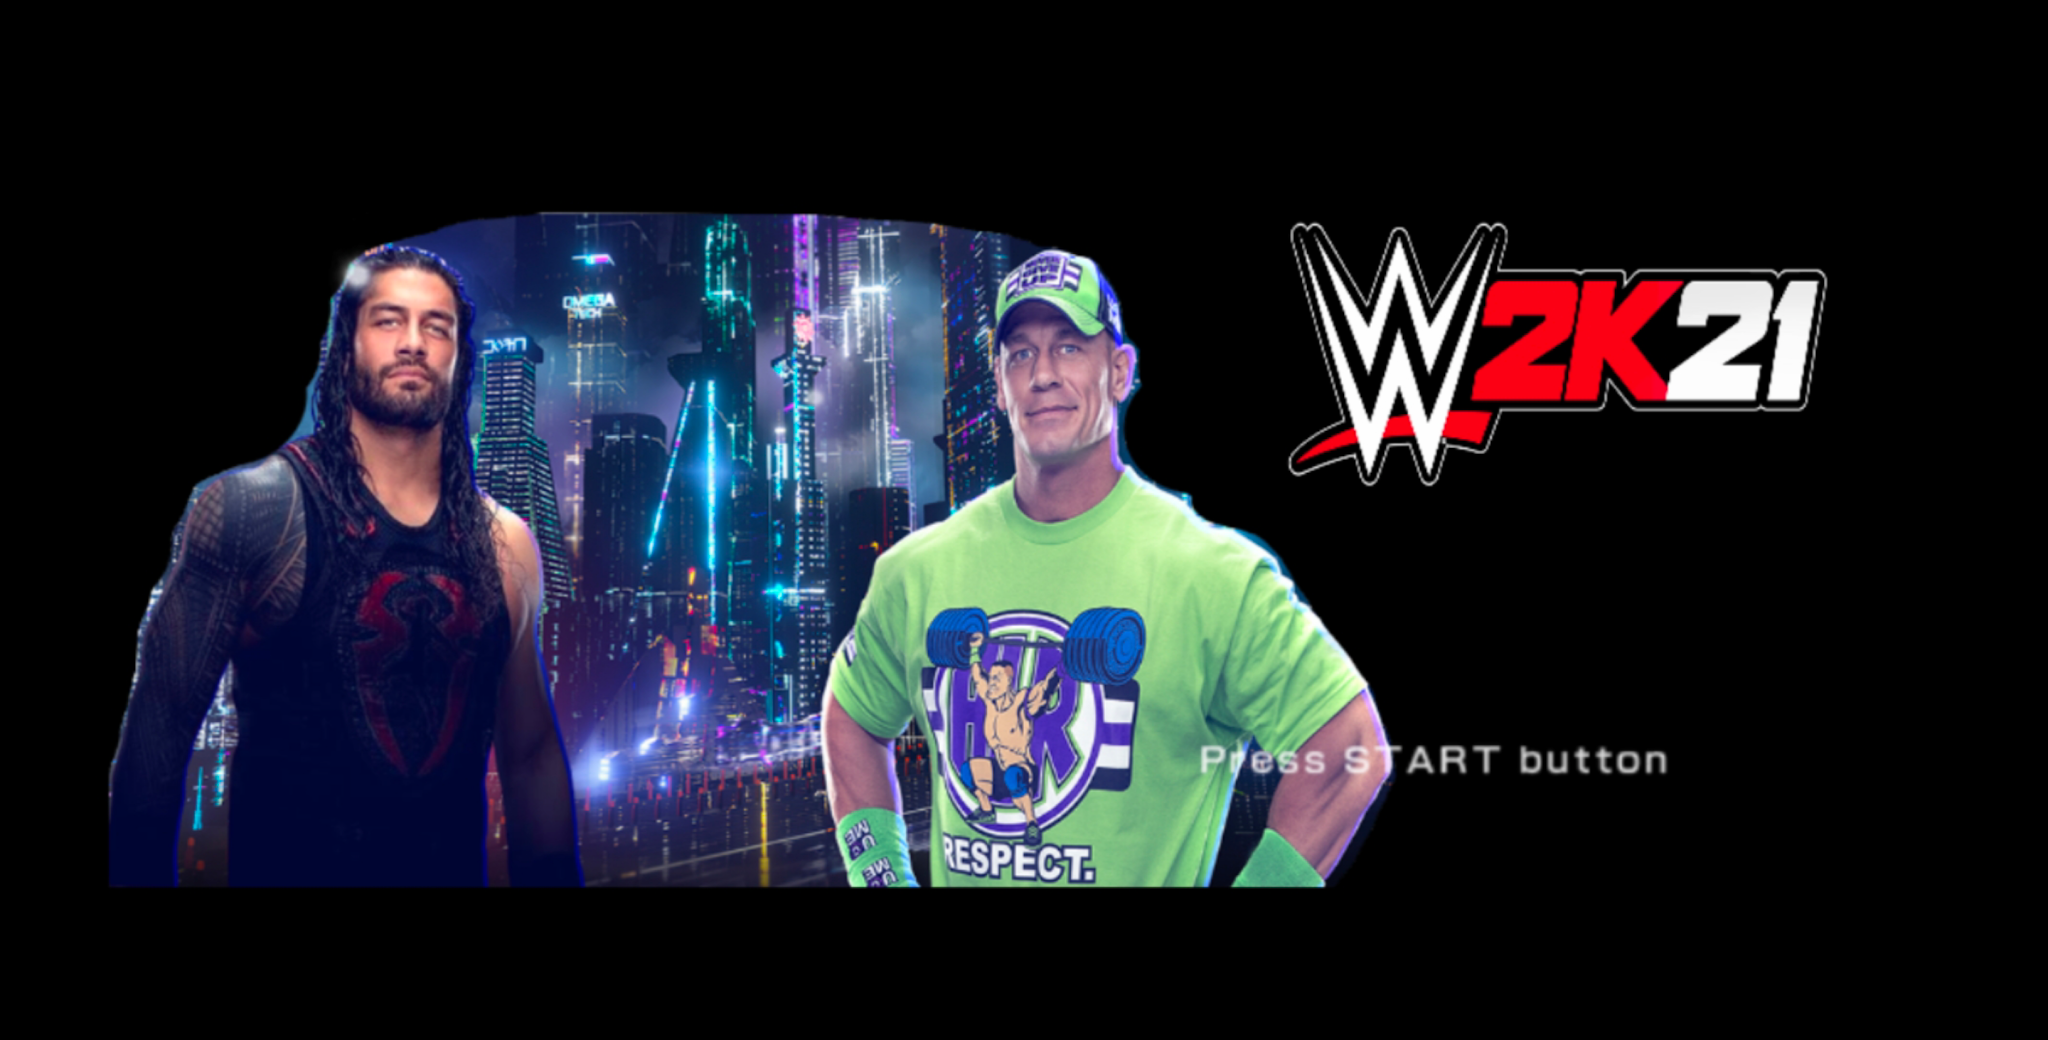 Pesgames on X: 🎮 WWE 2K22 PPSSPP DOWNLOAD ➖➖➖➖➖➖➖➖➖➖➖➖ 🗂 Download  Link:👇👇  ➖➖➖➖➖➖➖➖➖➖➖➖ 💾 FREE DOWNLOAD 100%  ➖➖➖➖➖➖➖➖➖➖➖➖ ☑️ Best Gaming Graphics ➖➖➖➖➖➖➖➖➖➖➖➖ 🌀